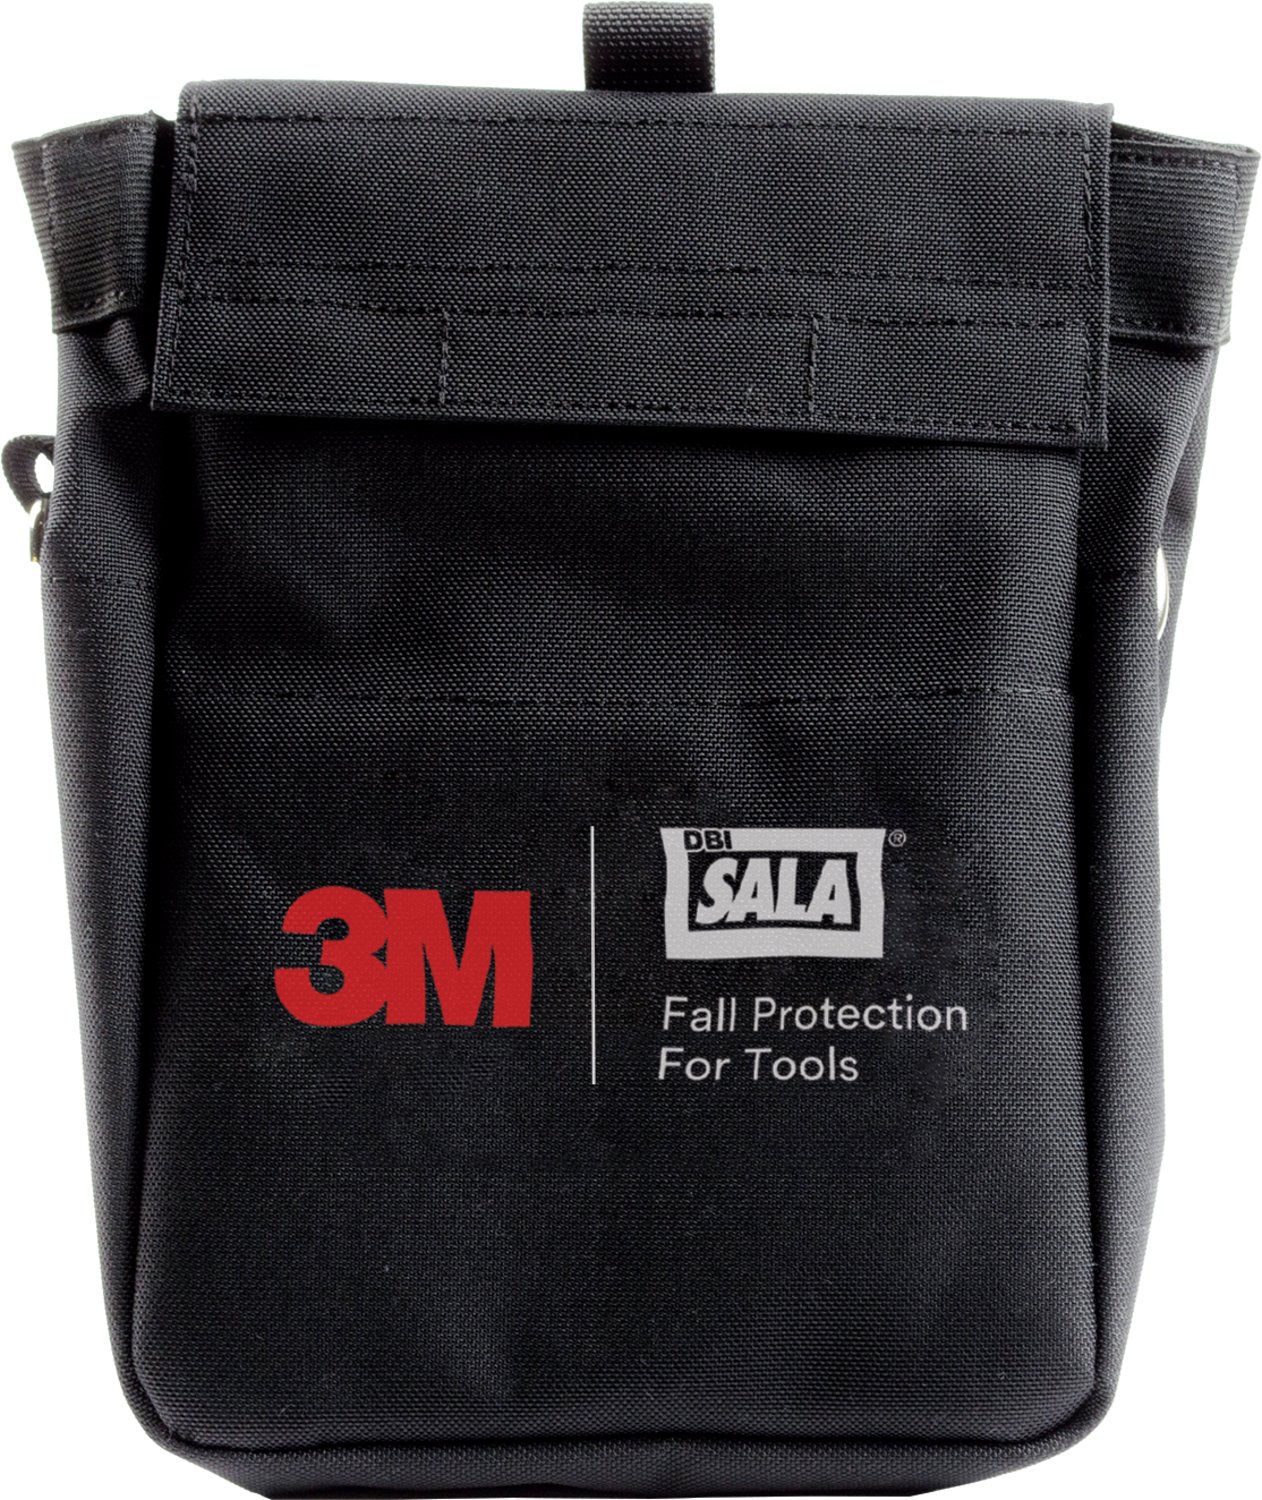 7100238136 - 3M Tool Pouch with D-ring 1500124, Canvas, Black, 7.5 in x 11 in